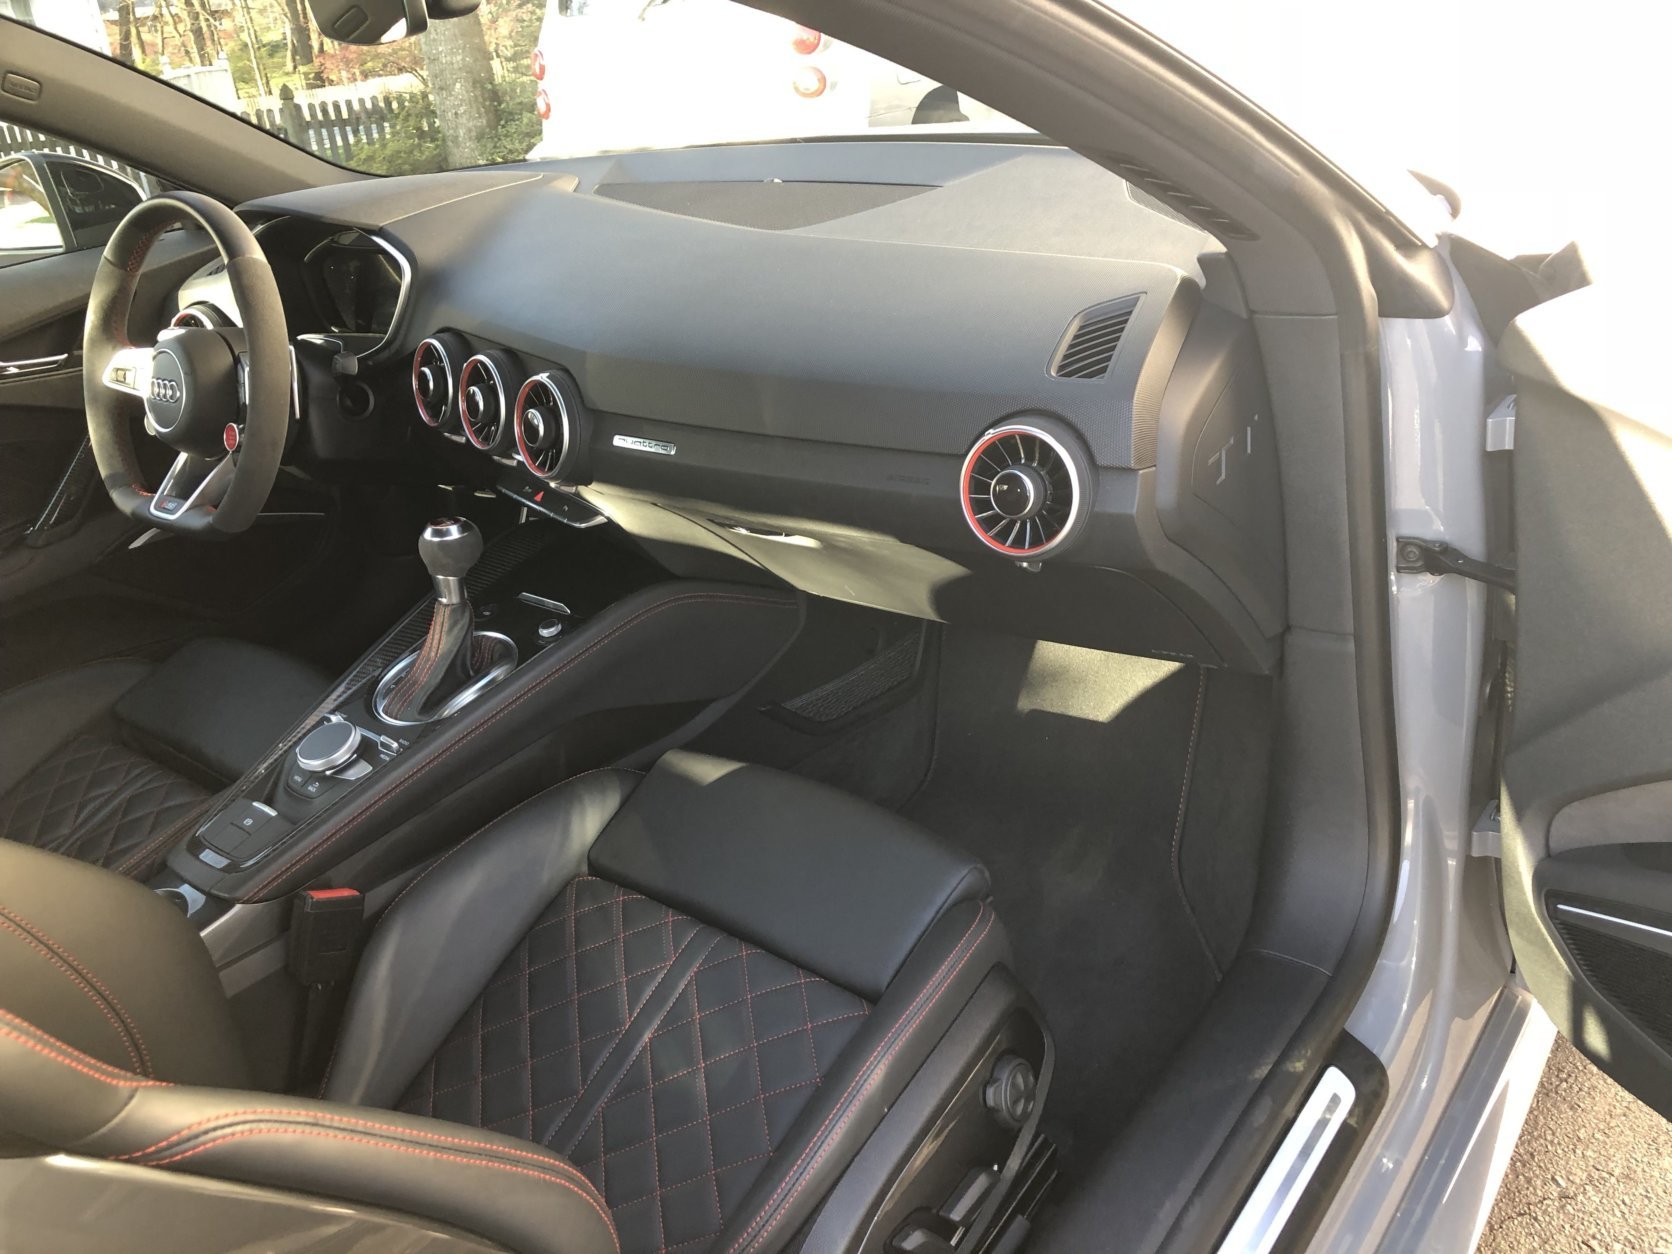 The diamond stitching in the Audi TT RS contributes a luxurious look to the seats. (WTOP/Mike Parris)